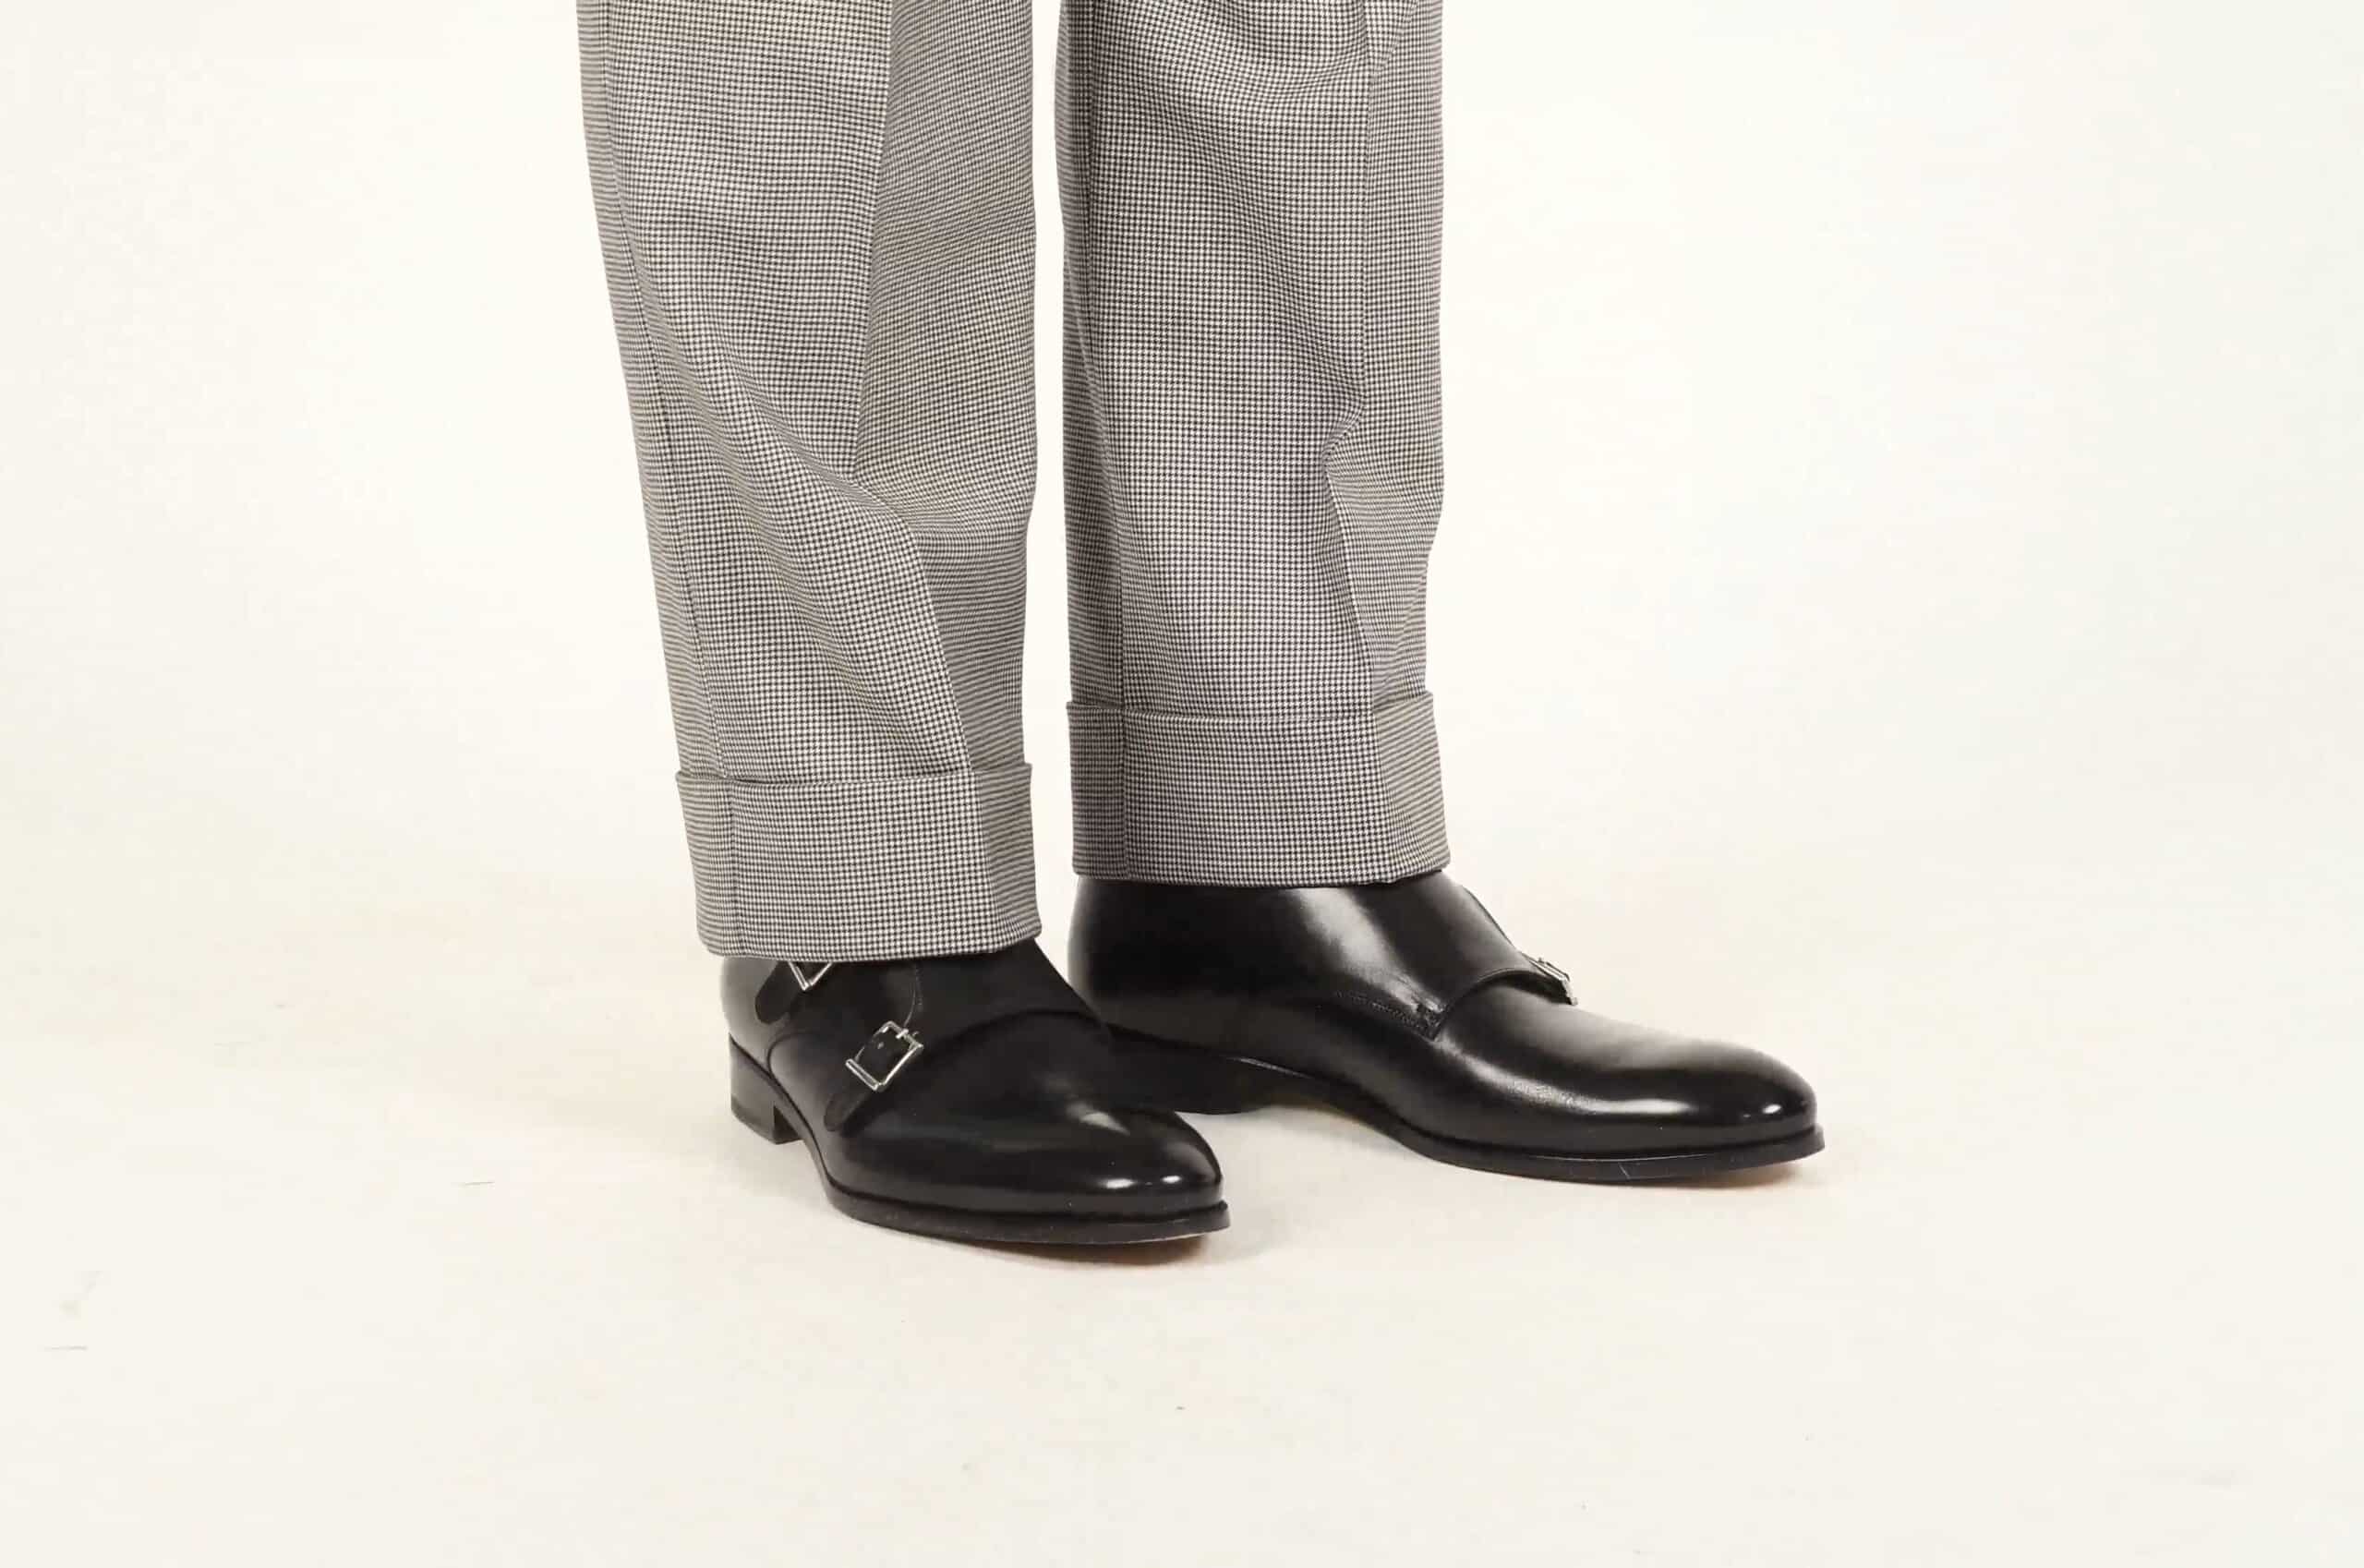 Black double monkstrap shoes shown here with black and white houndstooth trousers